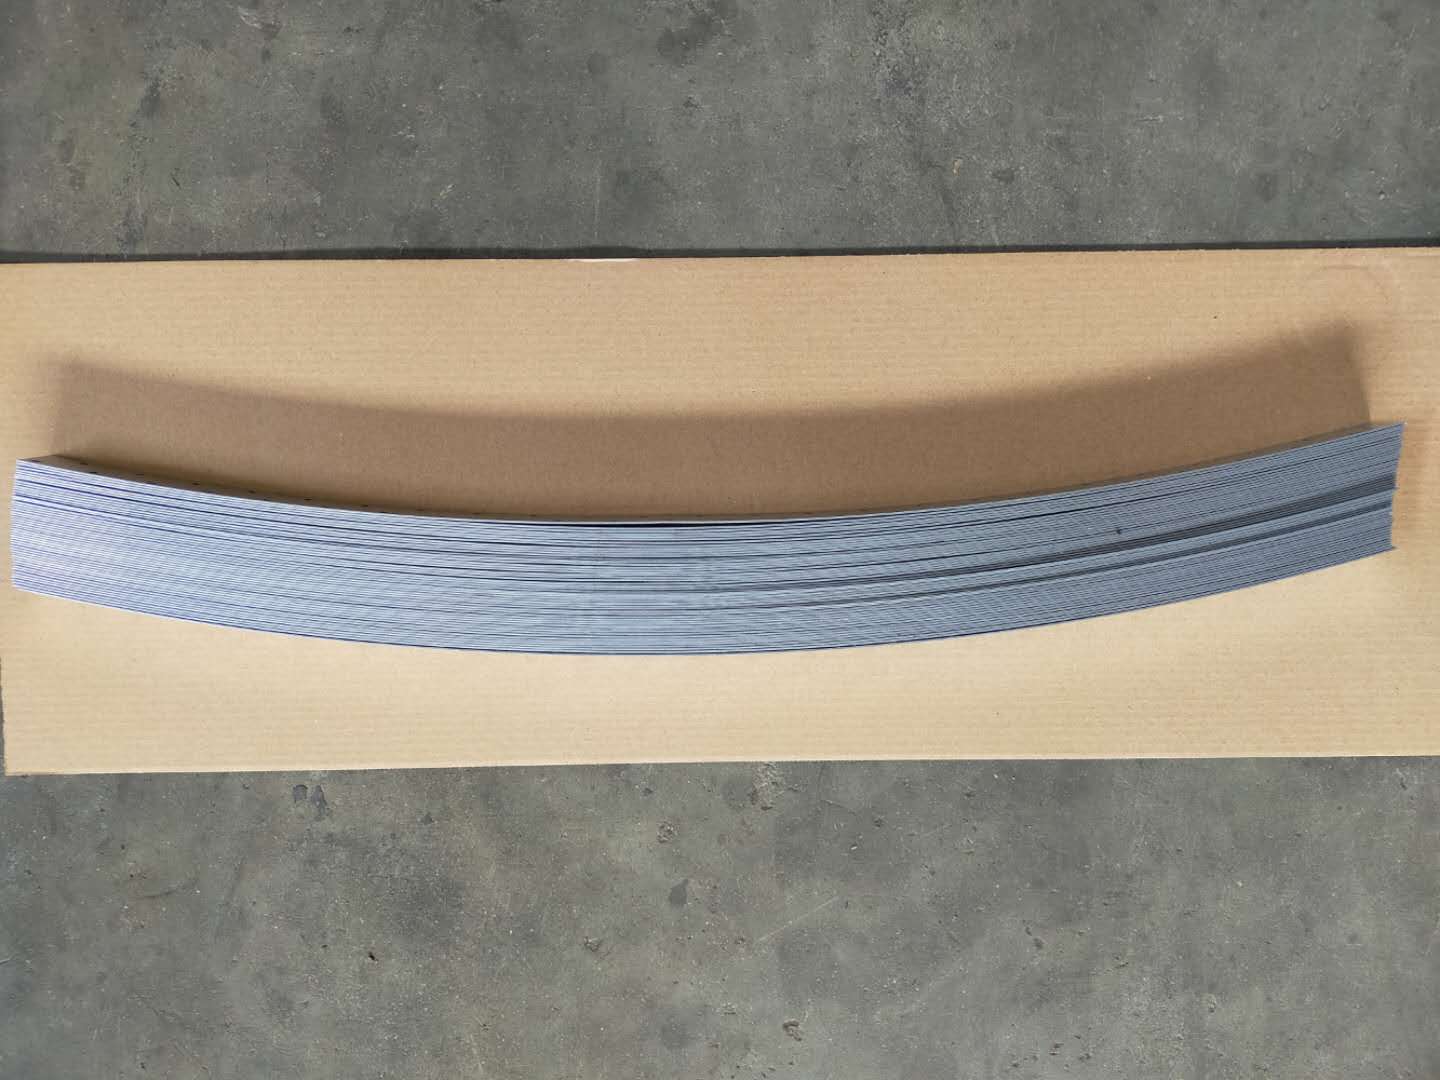 Galvanized Sheet Brace Straps for Timber Connectors